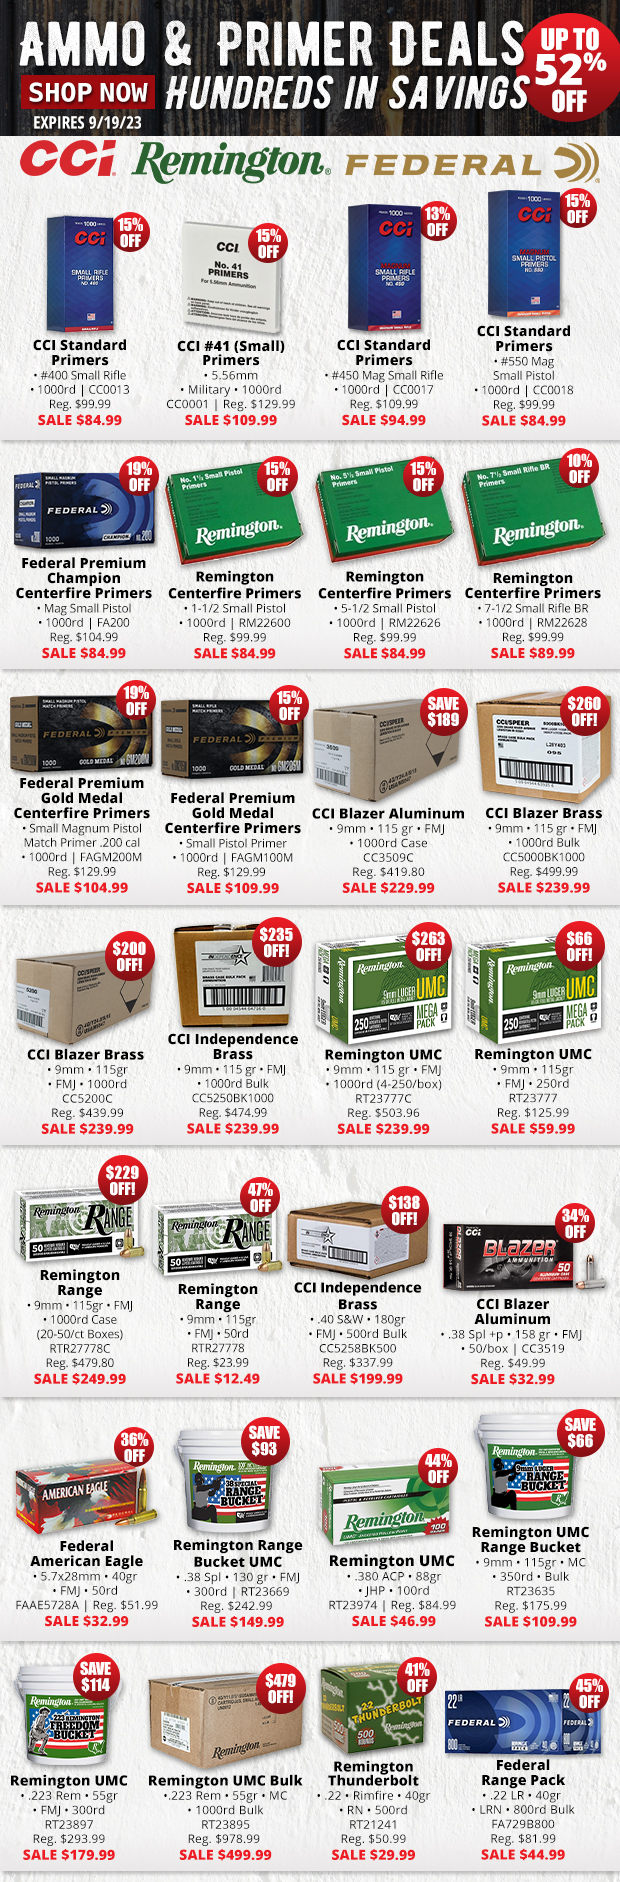 Up to 52% Off Ammo Deals